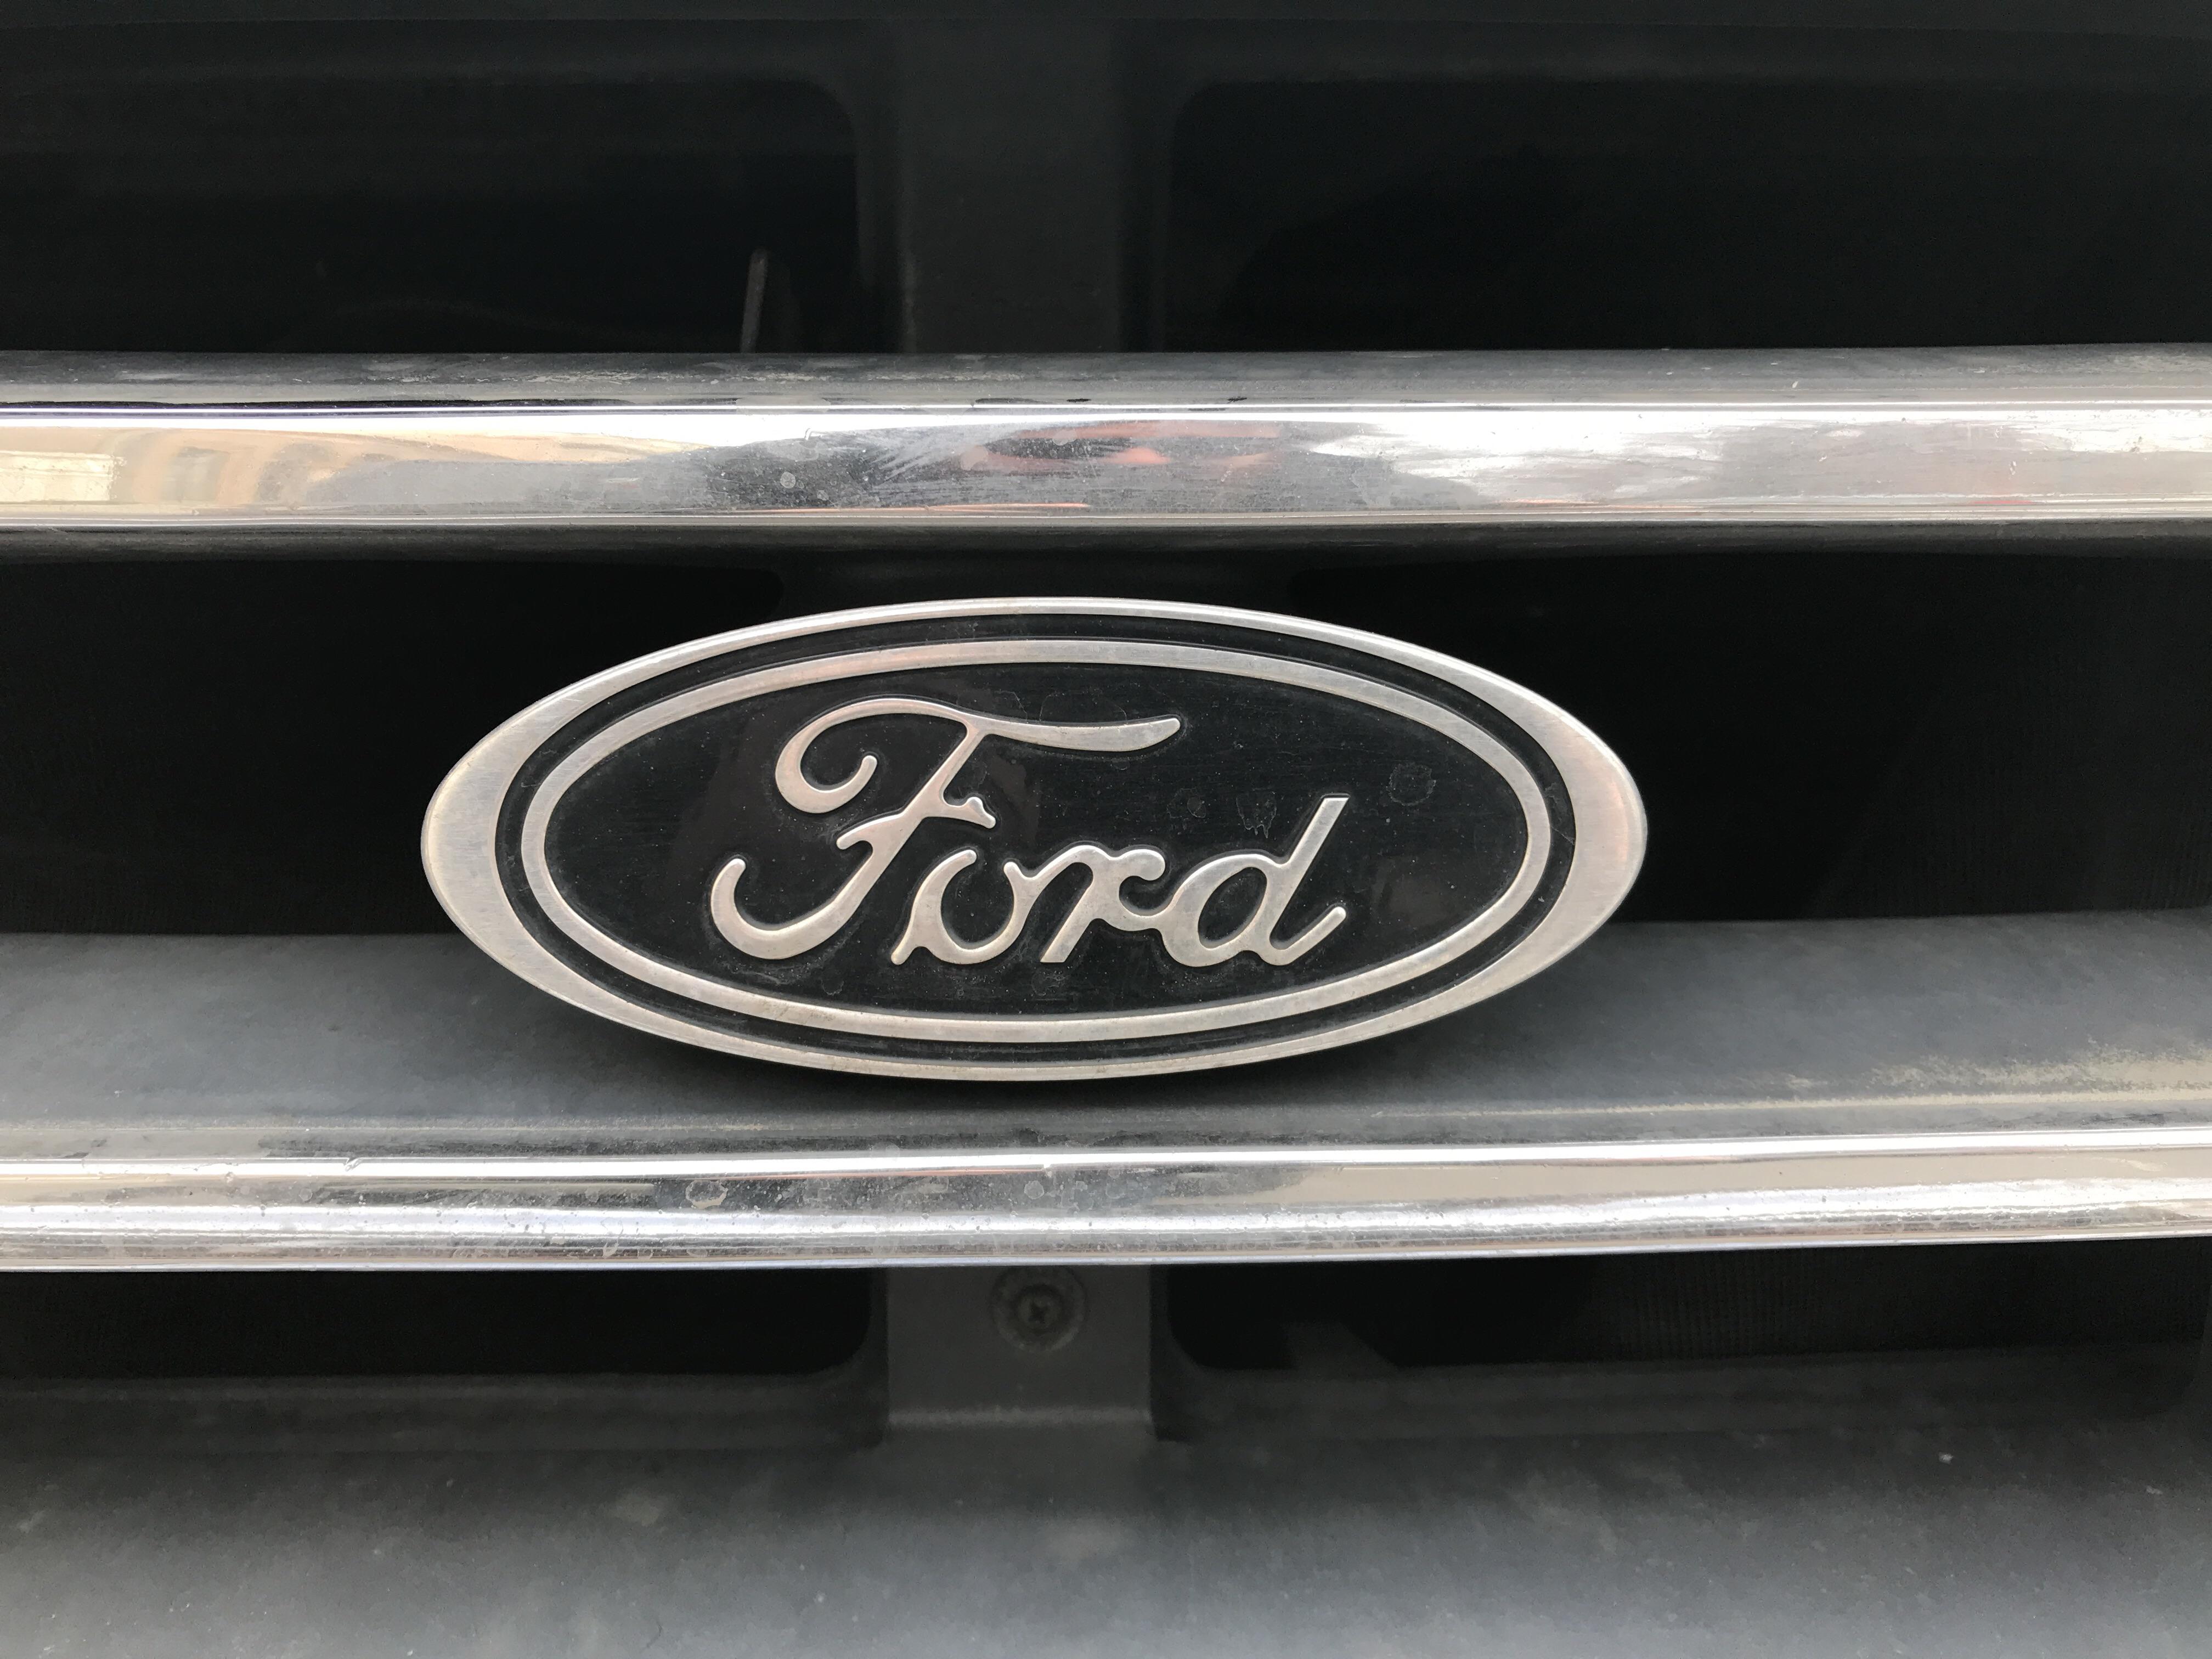 Original Ford Logo - As I was walking to work this morning I found a Ford truck from the ...